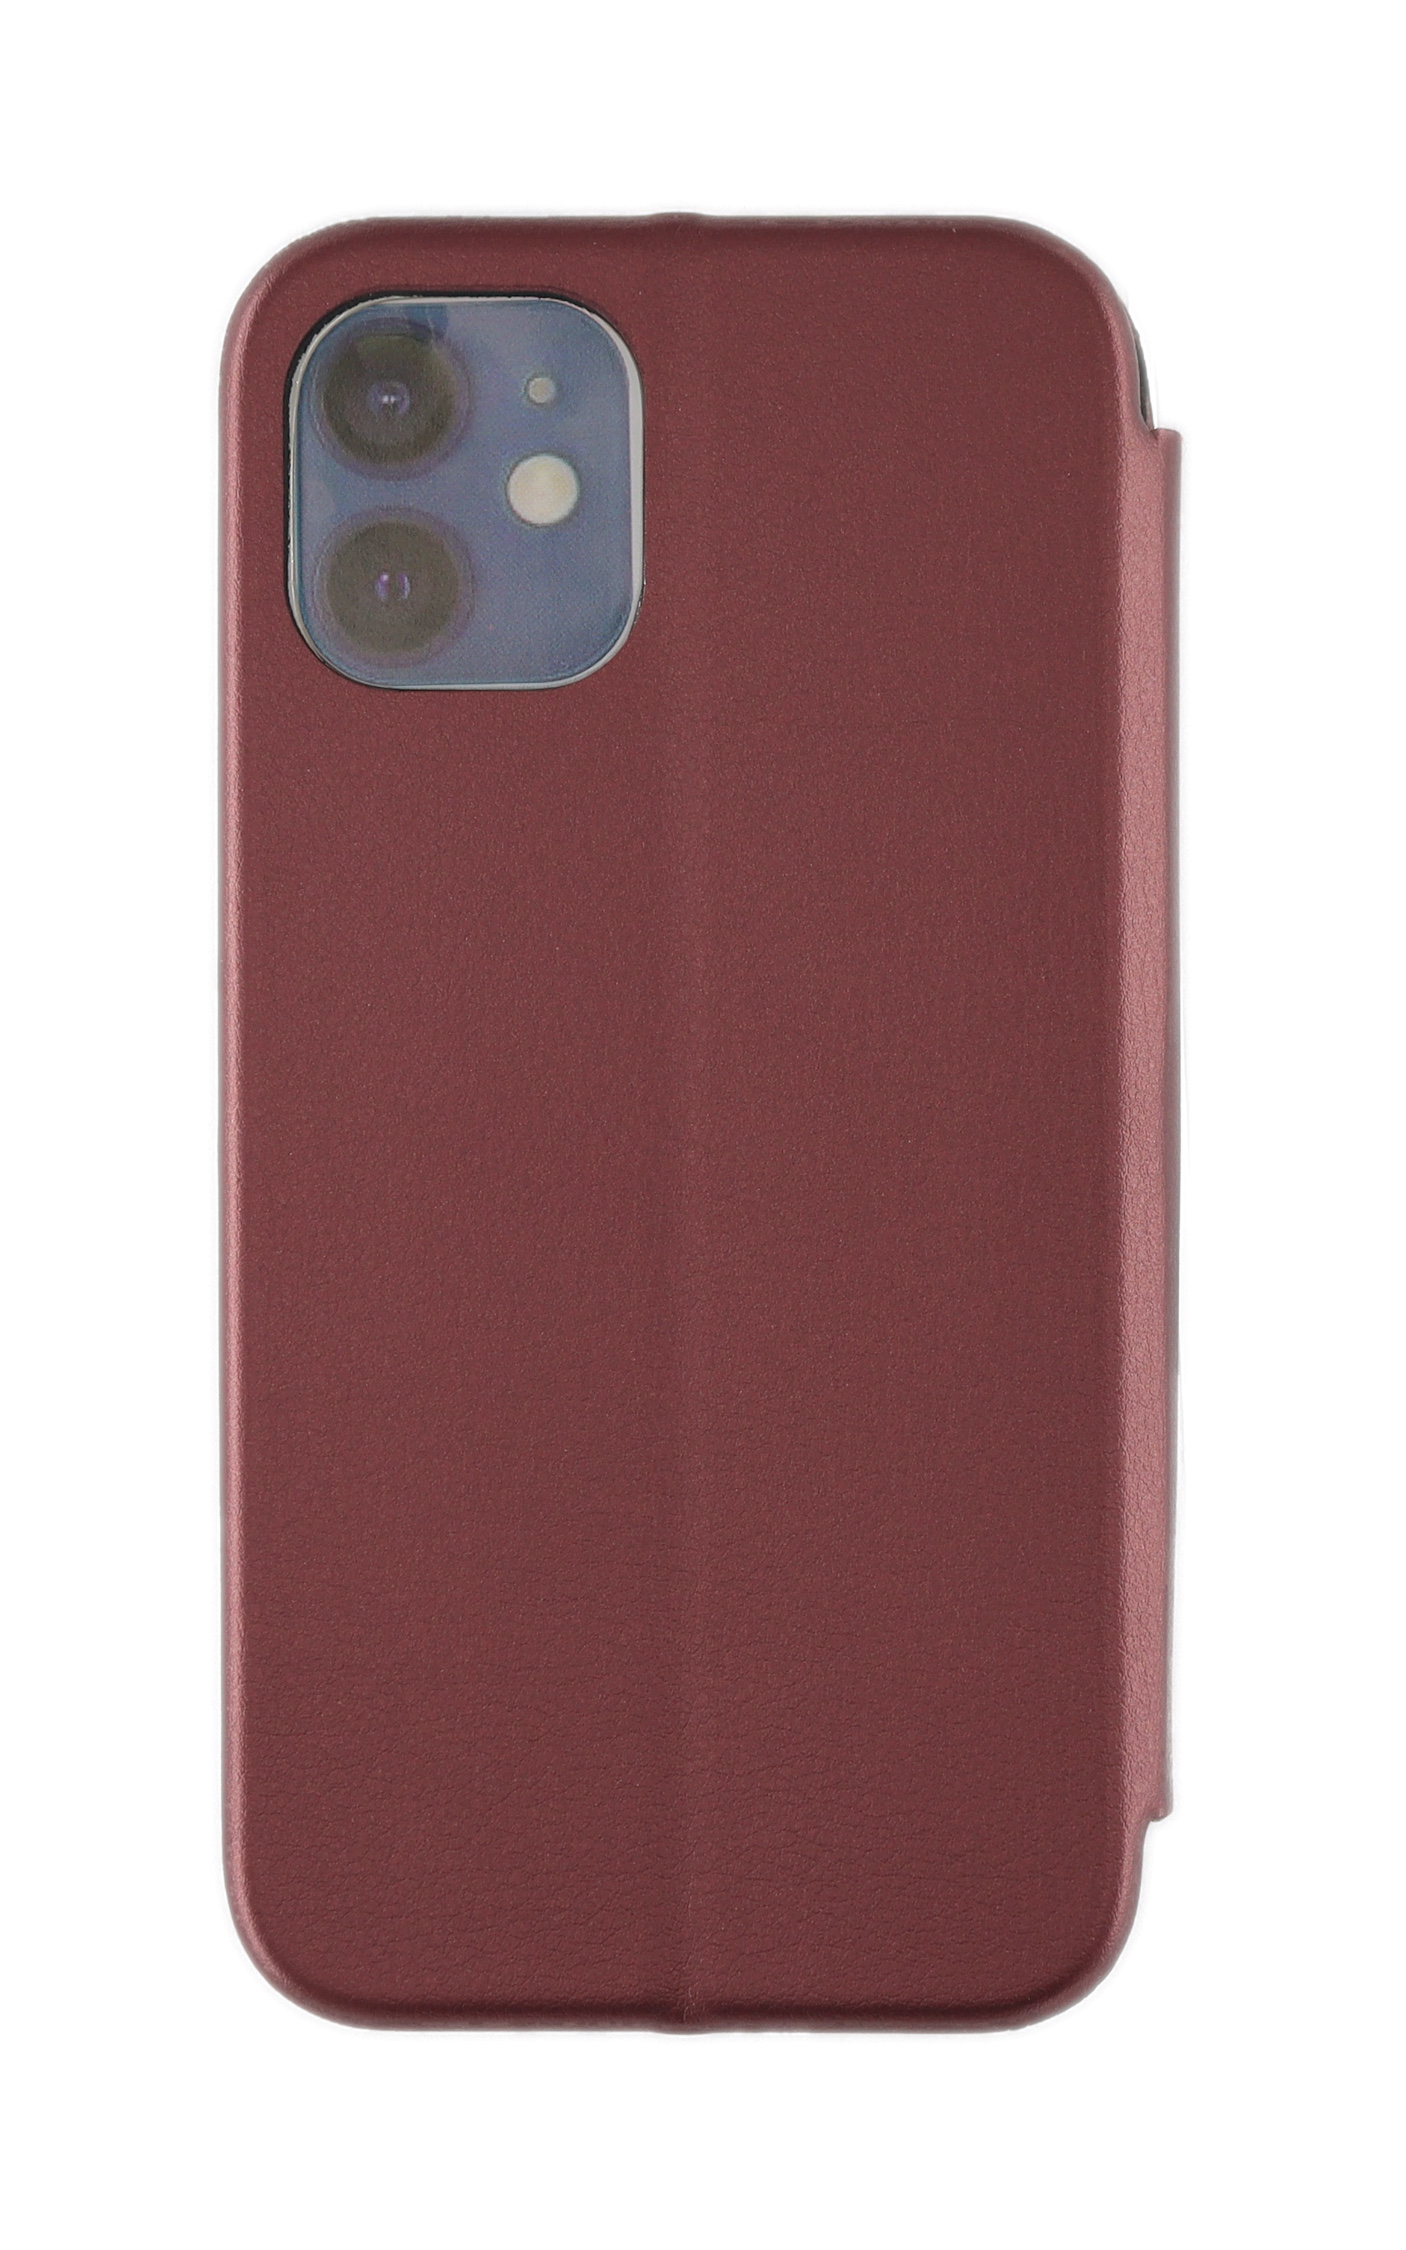 Bookcover, Rounded, iPhone 12 Burgunder / Apple, Bookcase 12 Pro, JAMCOVER iPhone